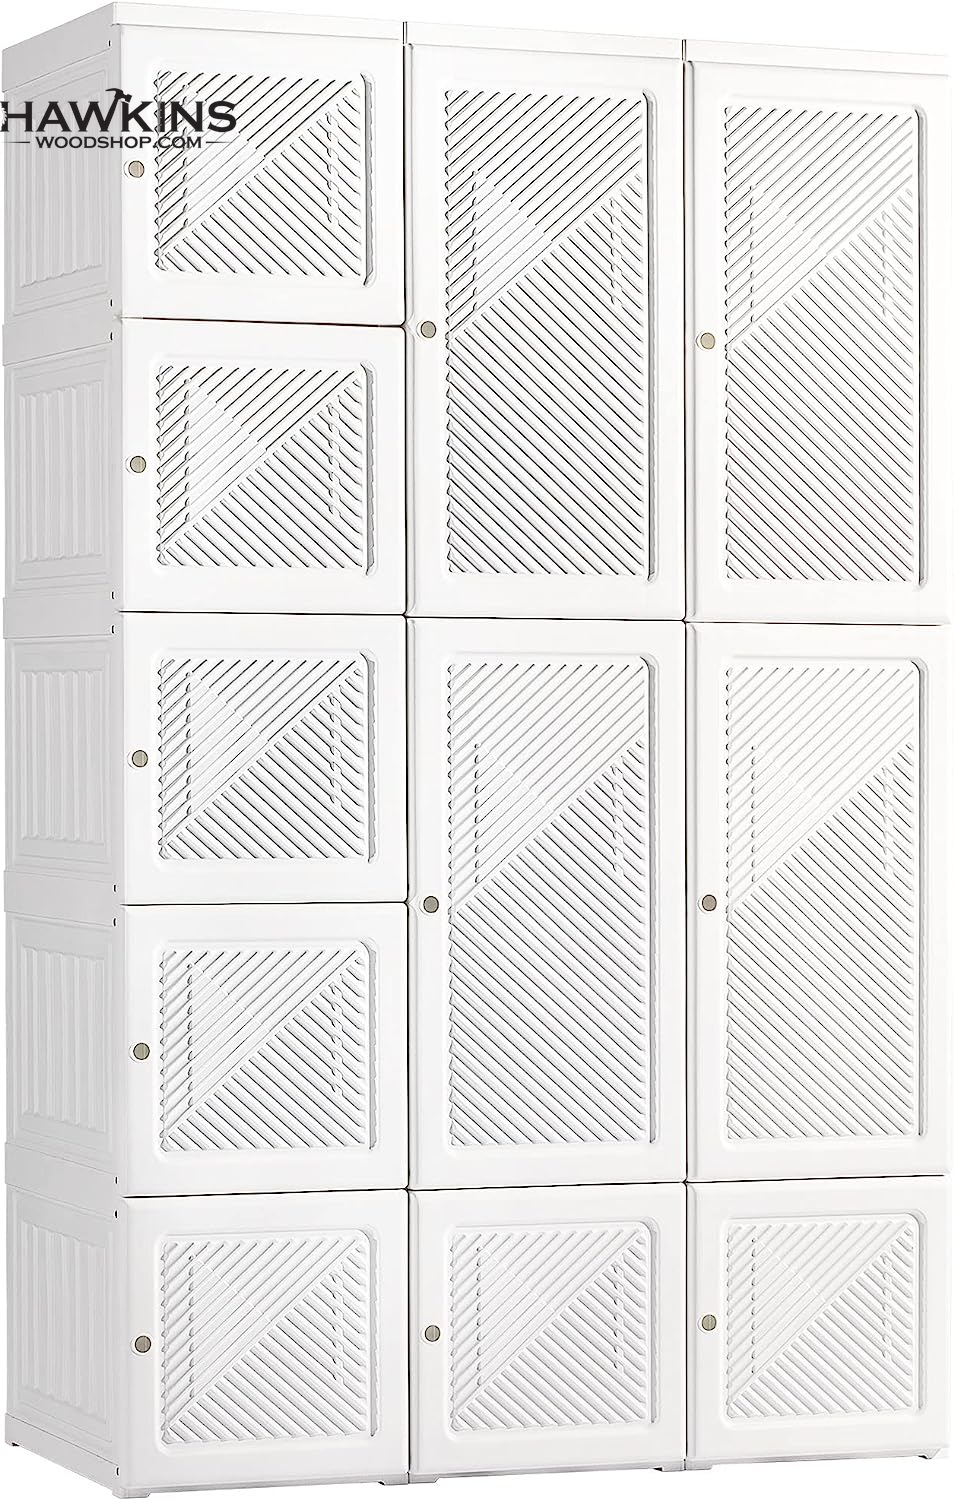 HOMCOM Portable Wardrobe Closet, Bedroom Armoire, Foldable Clothes Organizer with Cube Storage, Hanging Rods, and Magnet Doors - White